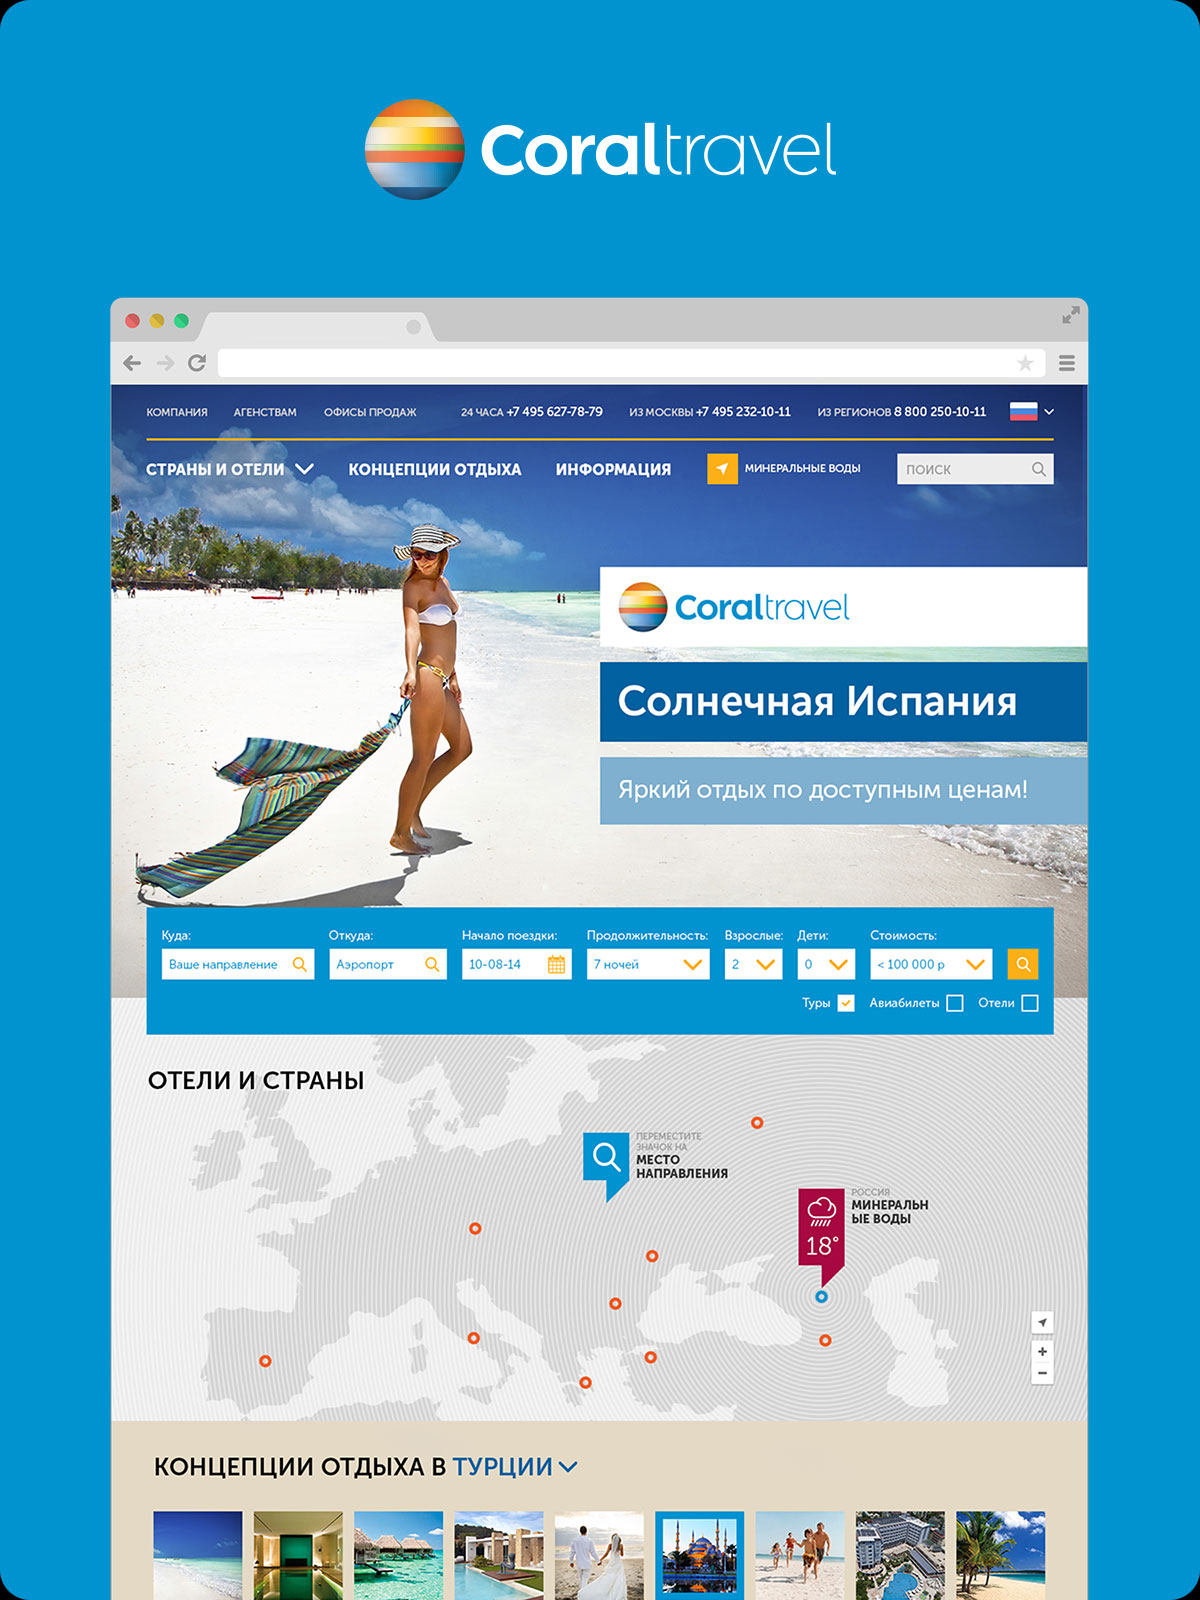 Coral Travel Russia website homepage concept